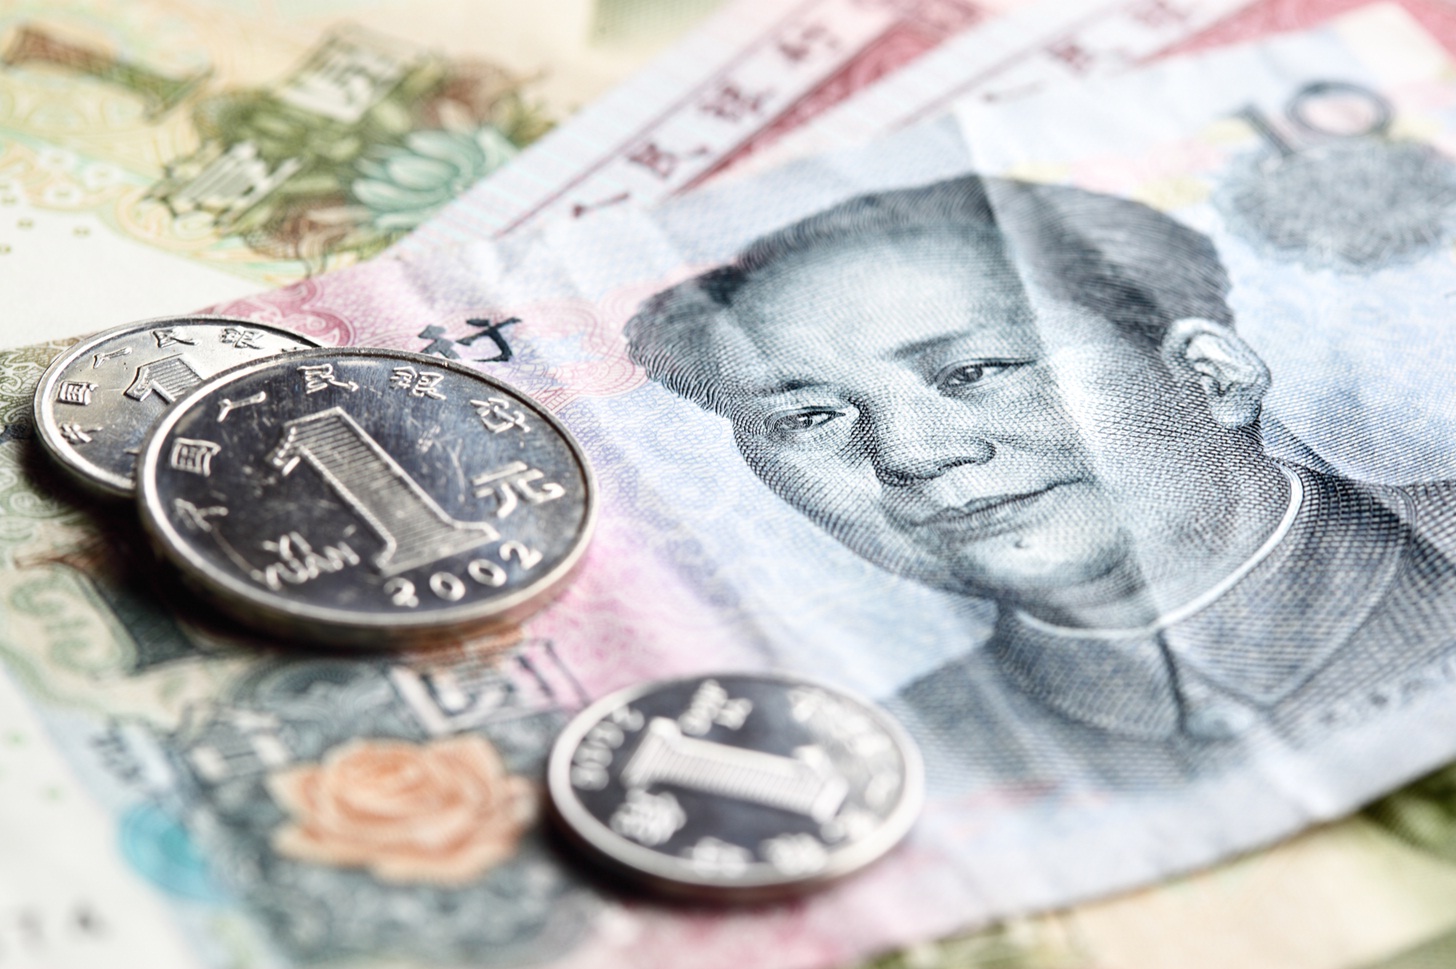 Digital RMB will be launched in 2-3 months, HCM Capital predicts